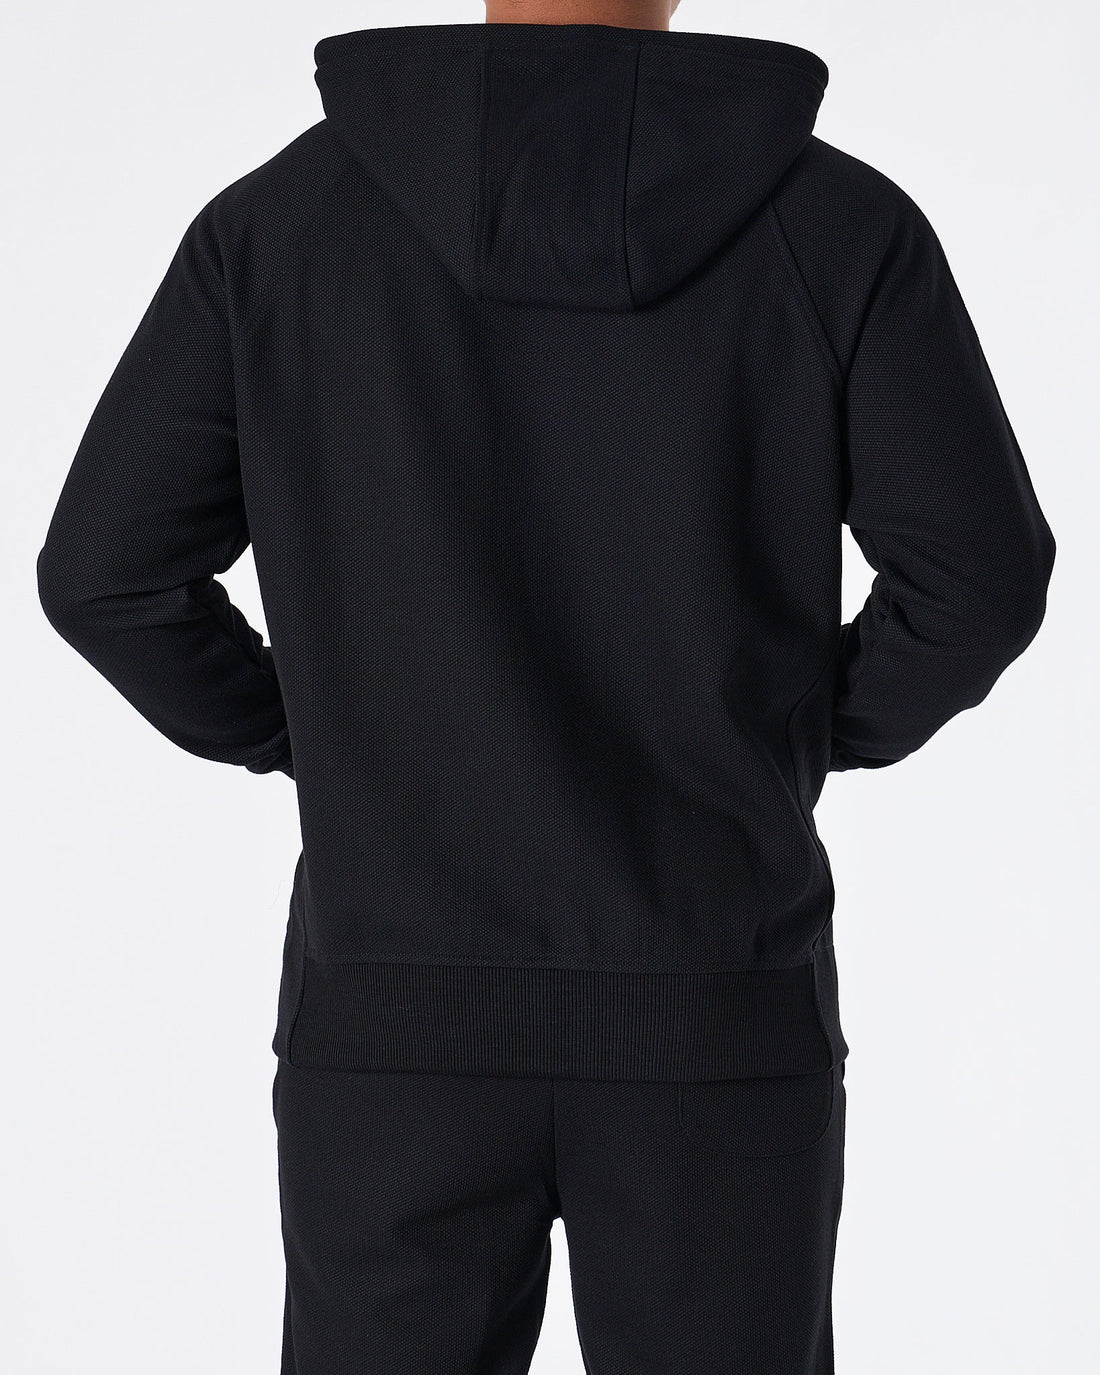 MOI OUTFIT-Casual Fit Men Black Hoodie 24.90